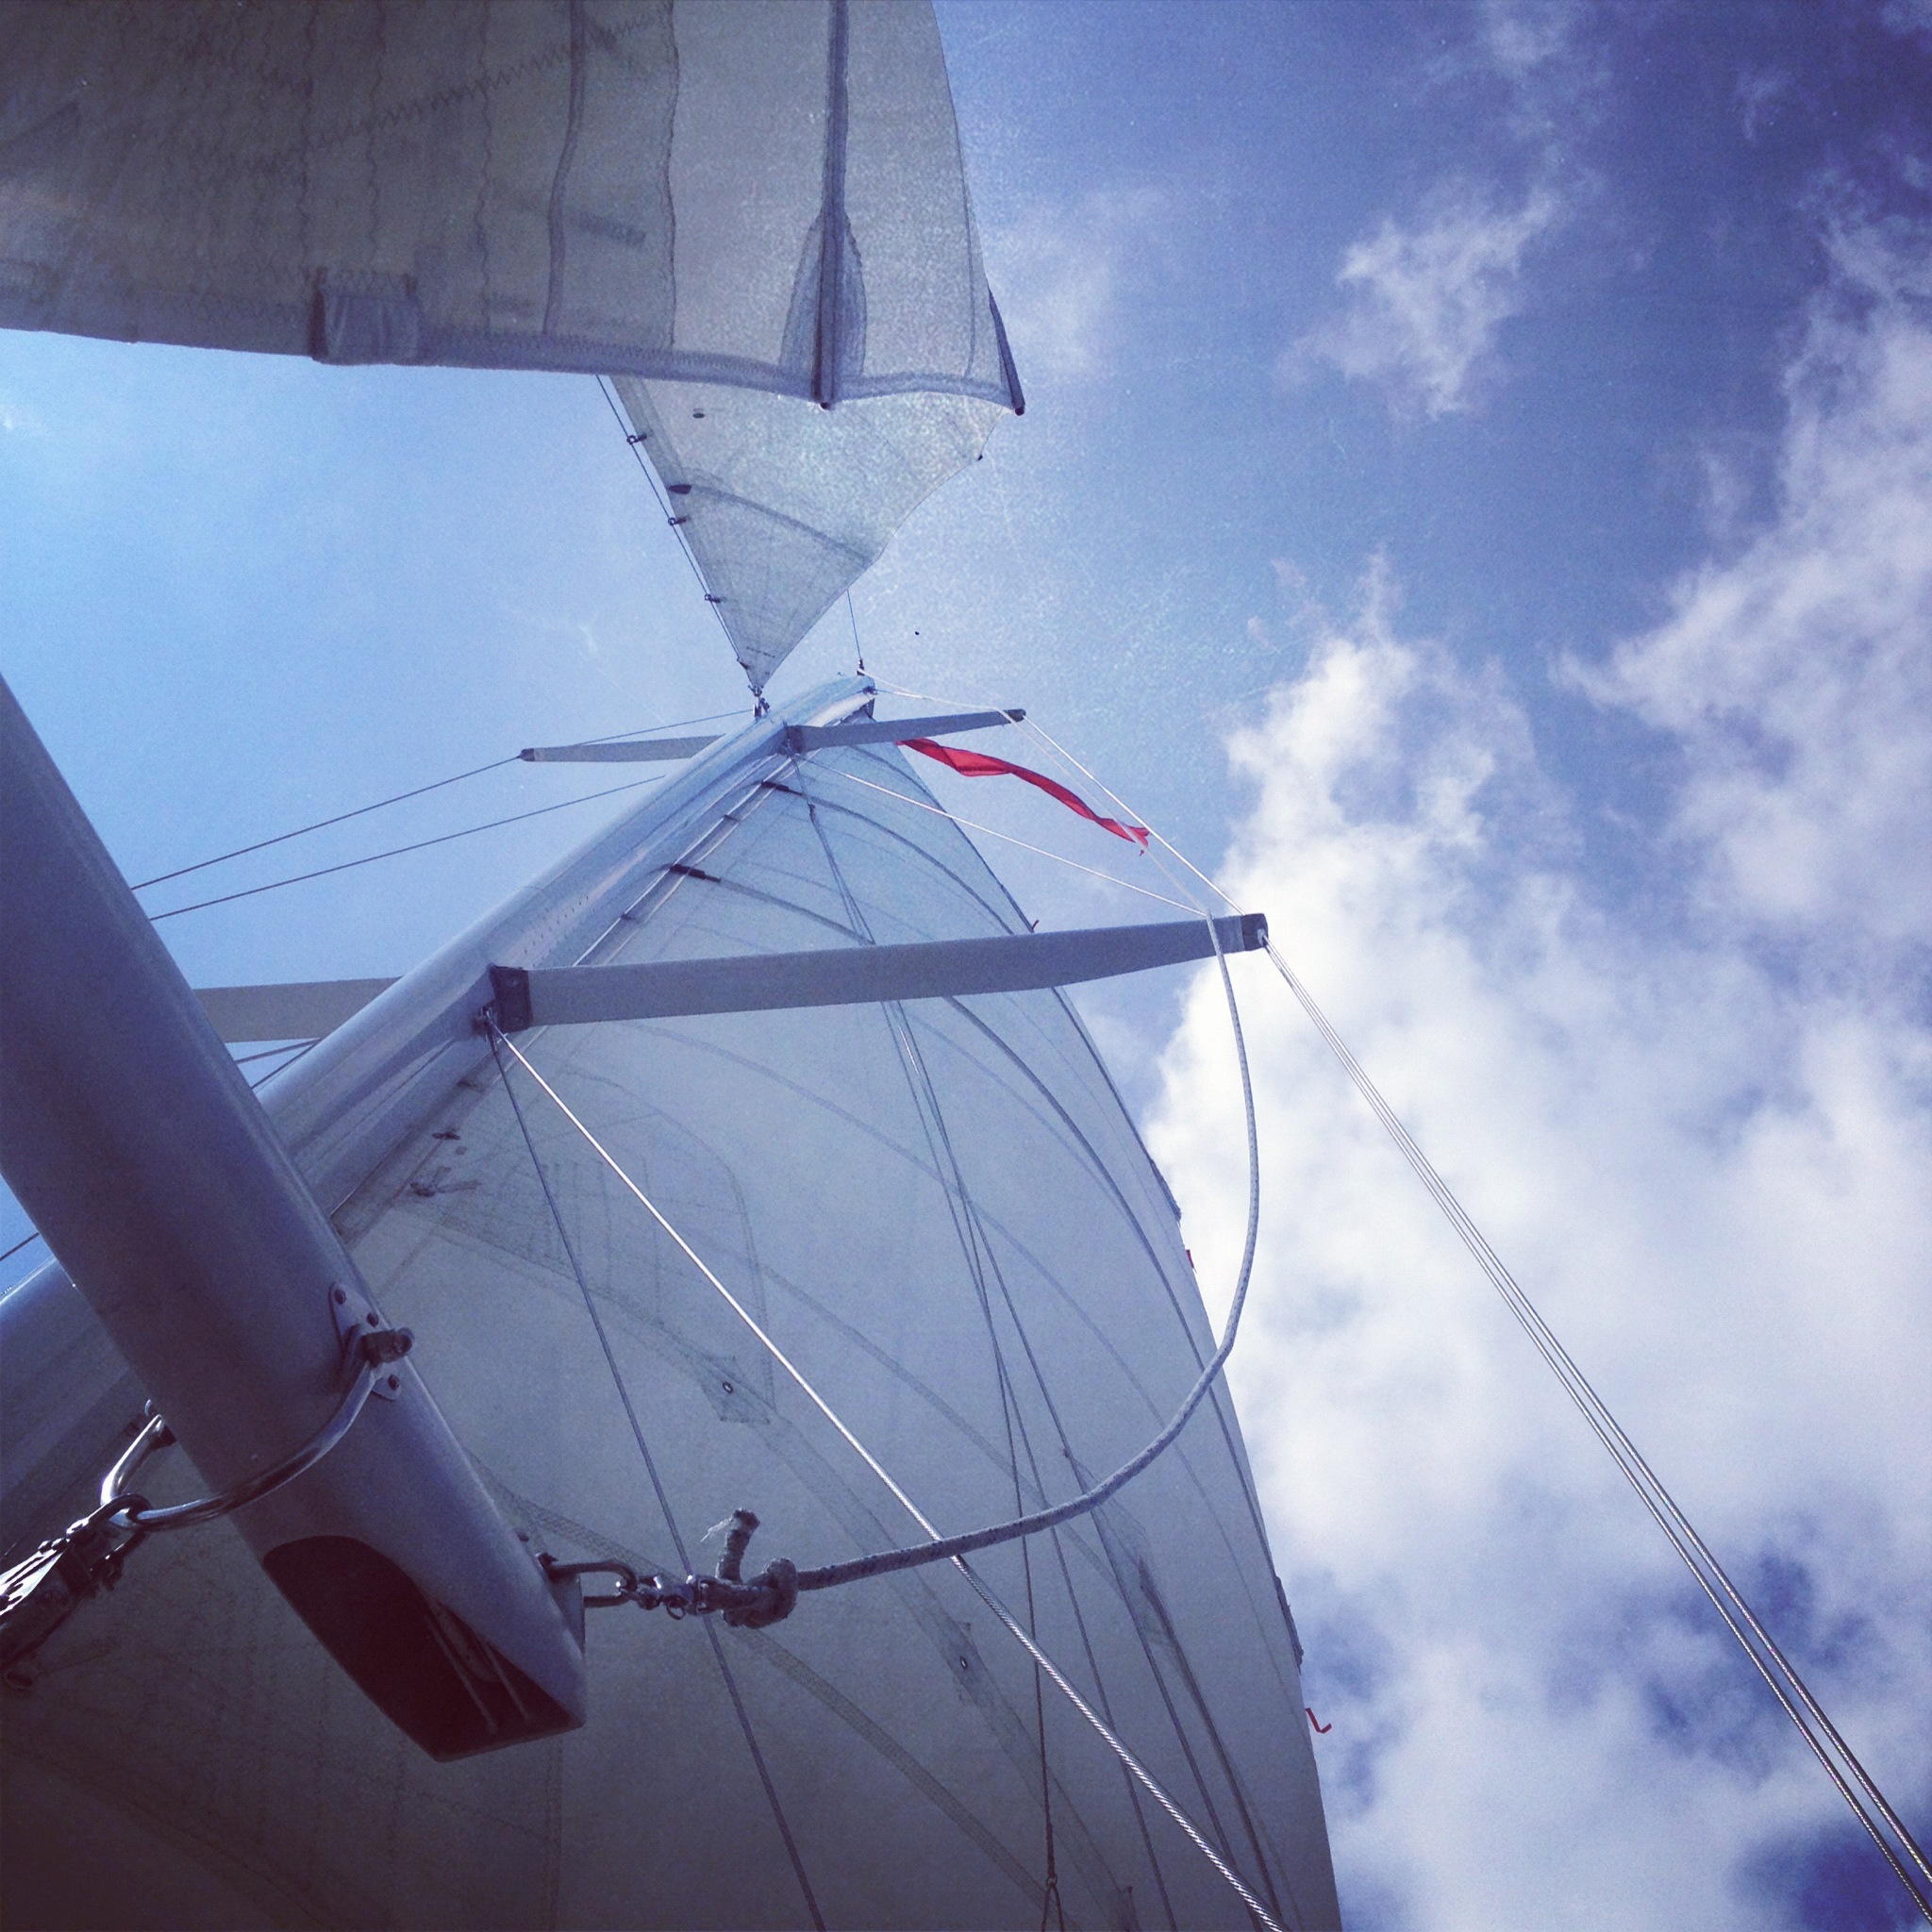 White sails and blue skies